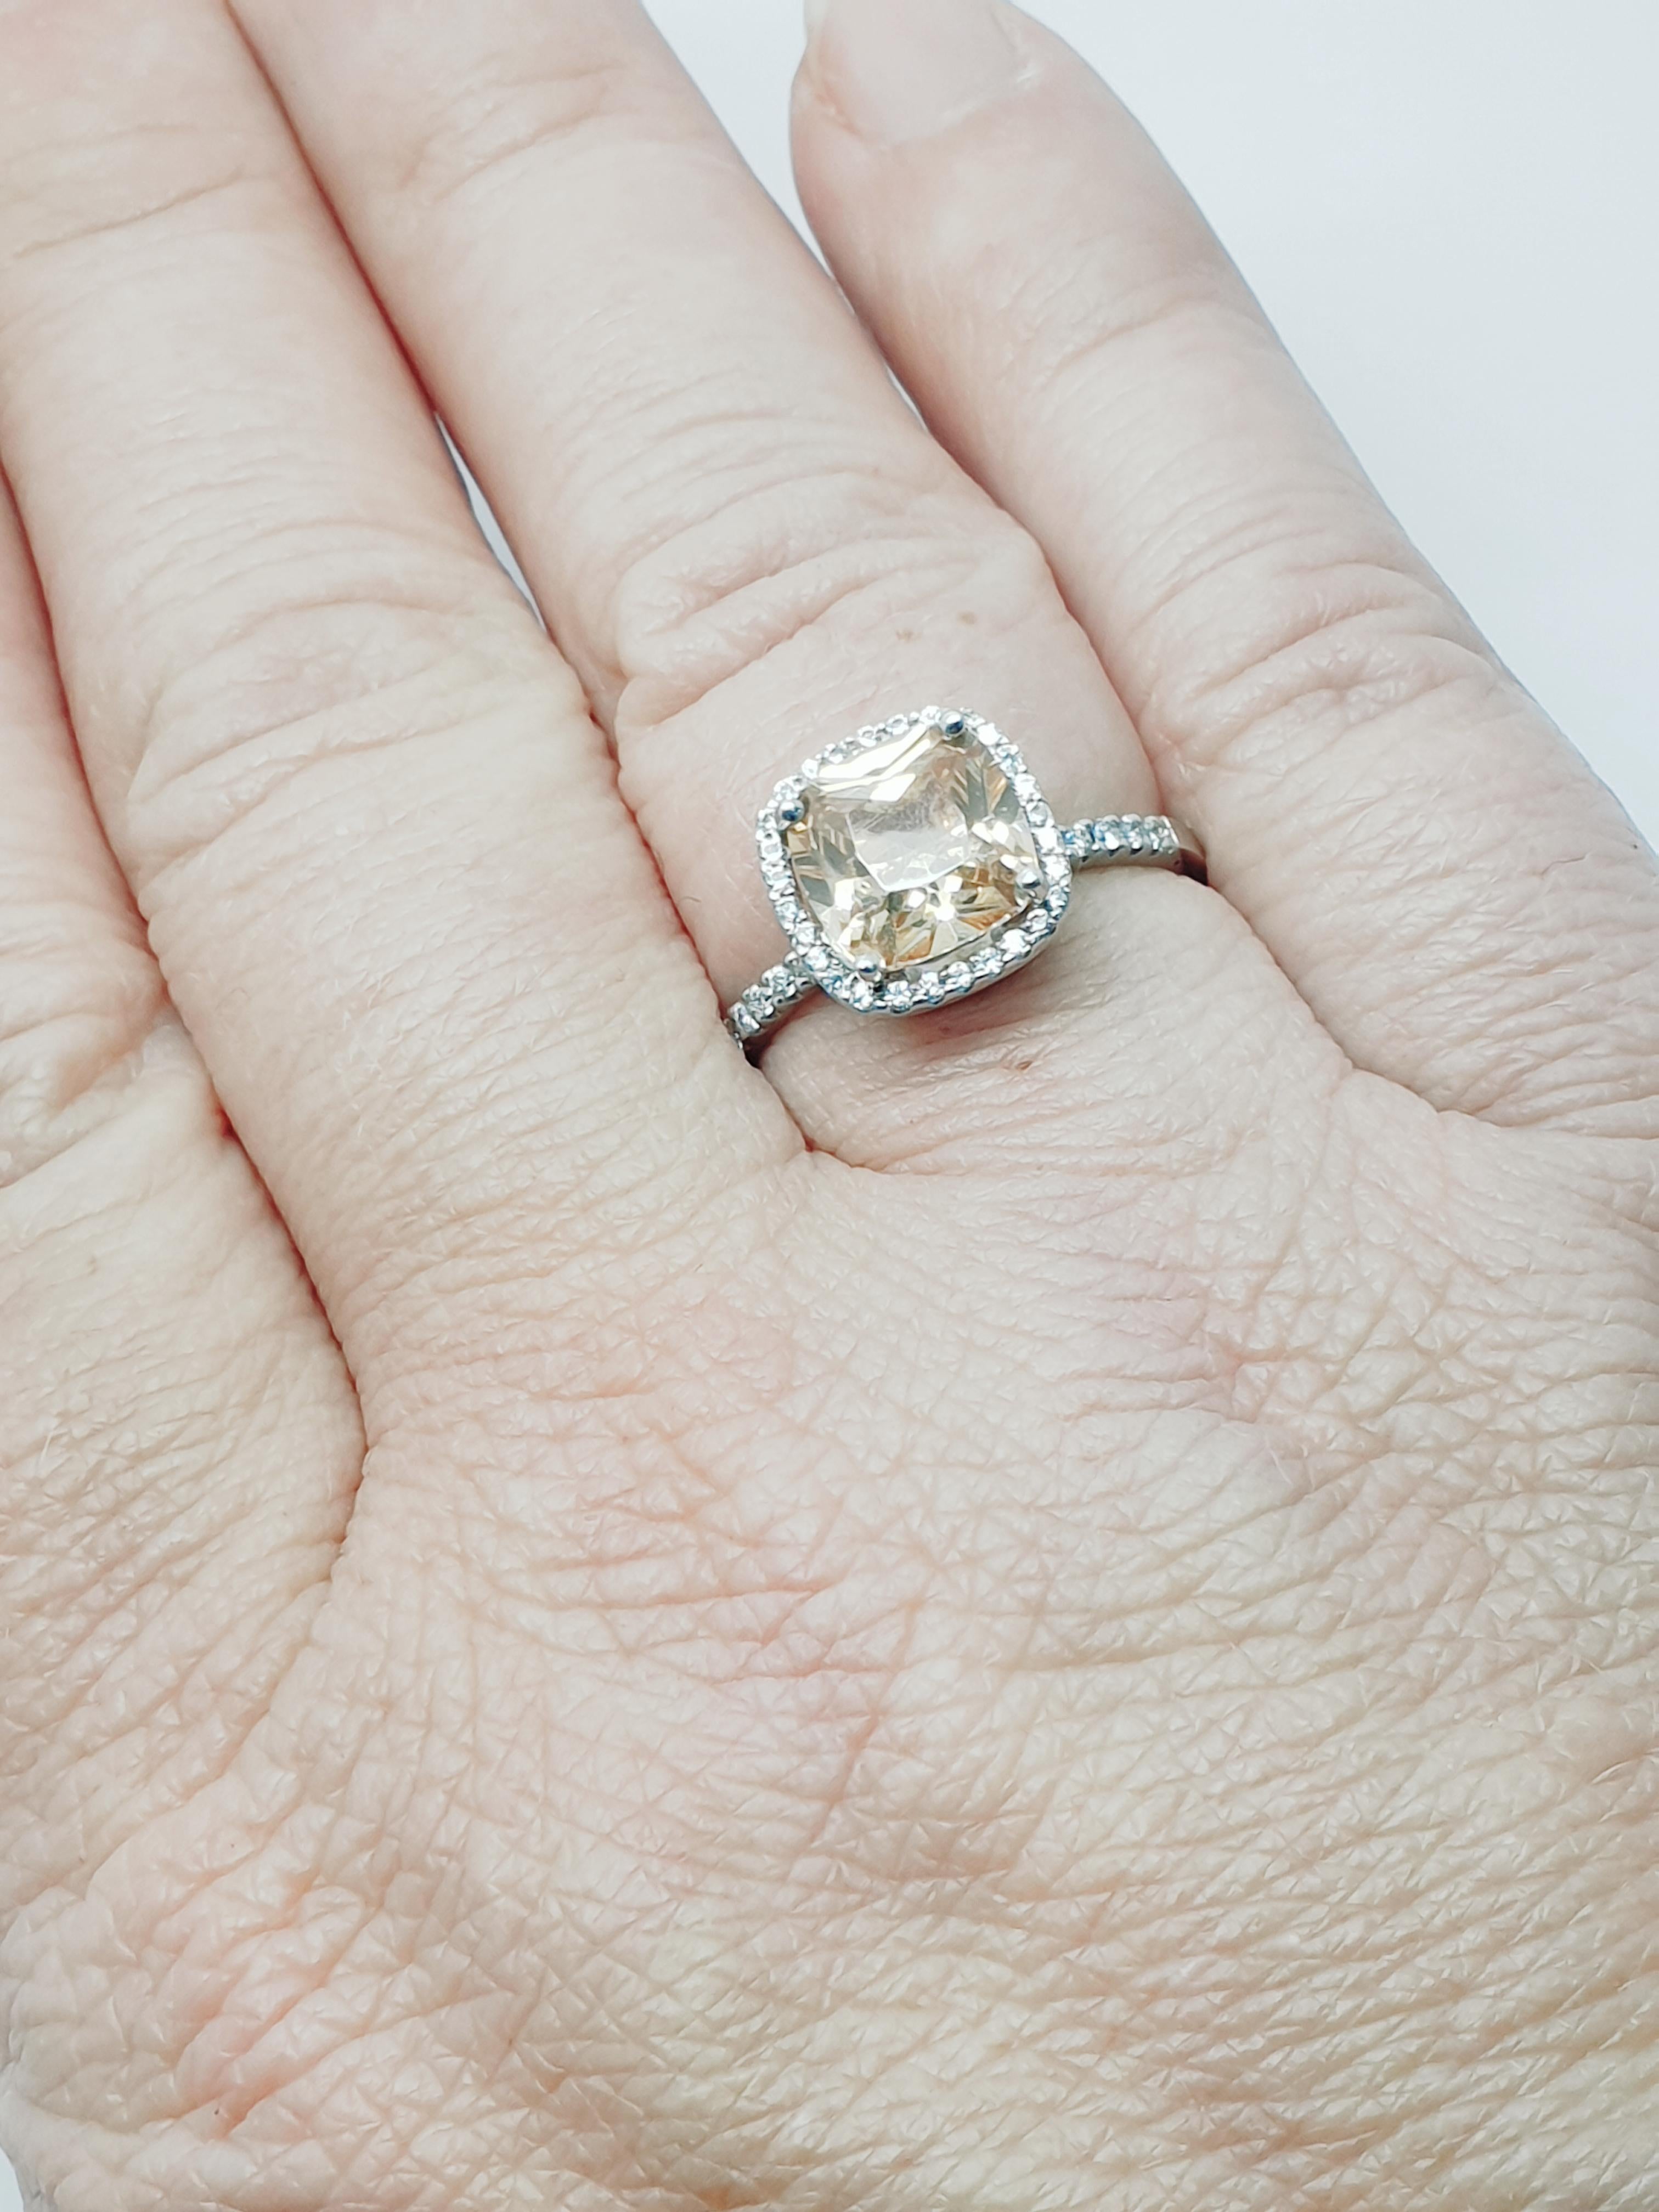 Offering for sale a bespoke made halo style zircon diamond ring. The zircon has a lovely peachy color cushion shape about 2.5 carat weight.The center stone surrounded with small diamonds . The diamonds total weight 0.16 ct.The ring is 18 karat white